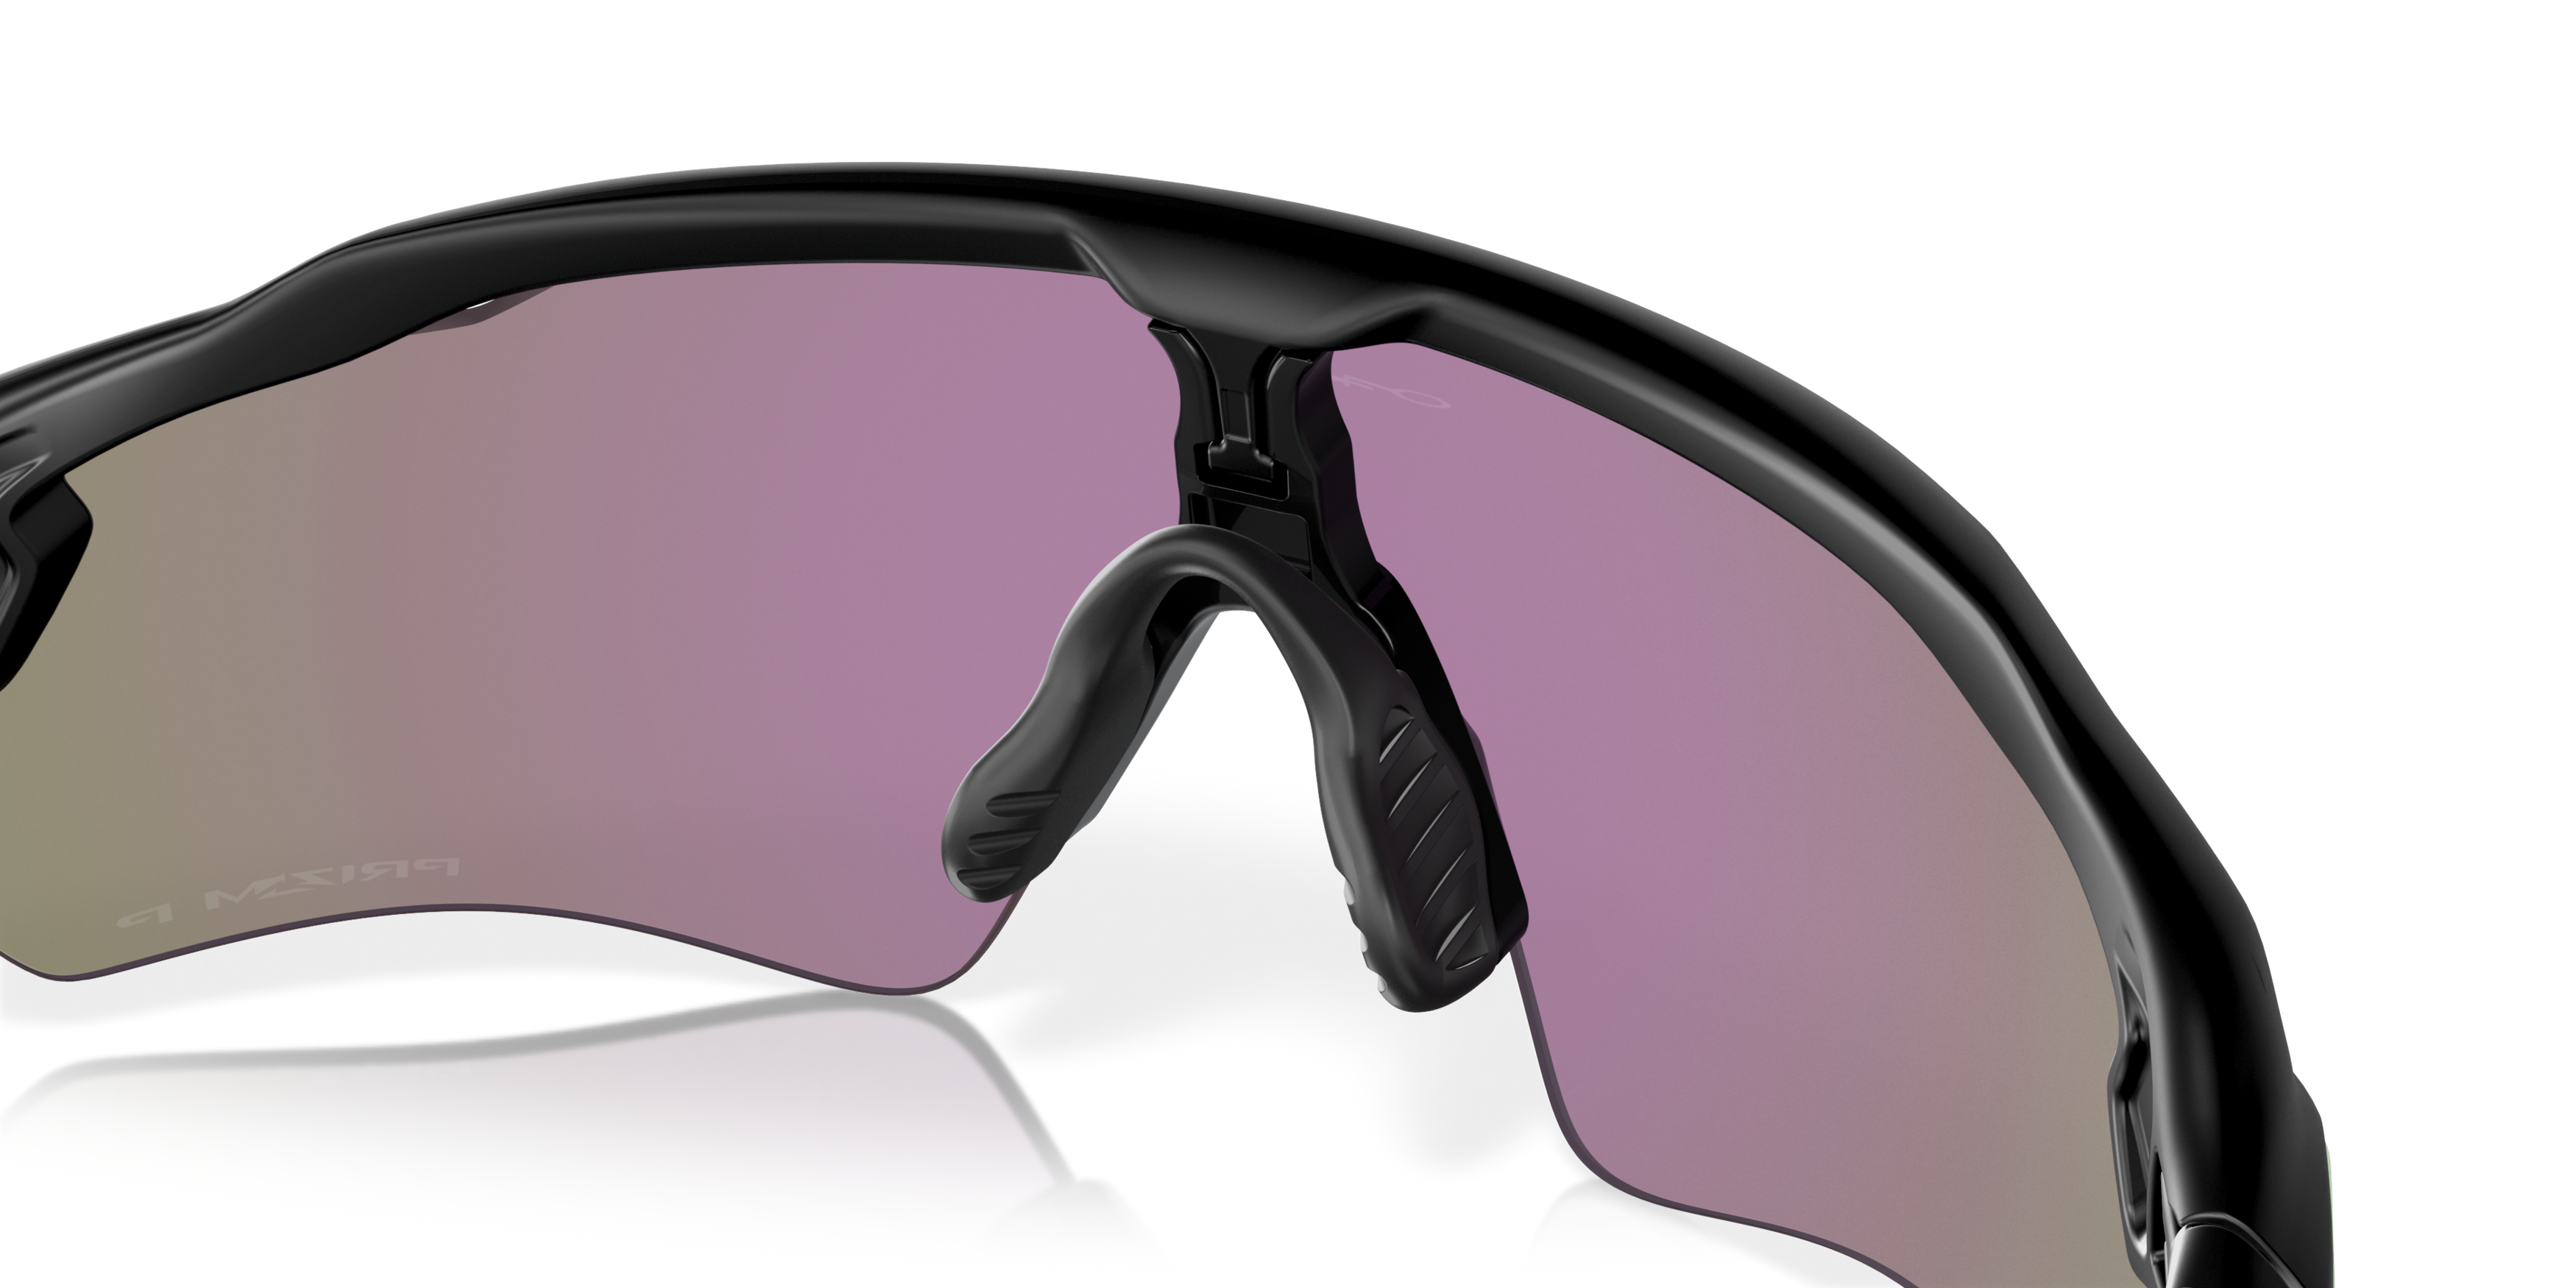 [products.image.detail03] Oakley Radar OO 9208 Sunglasses